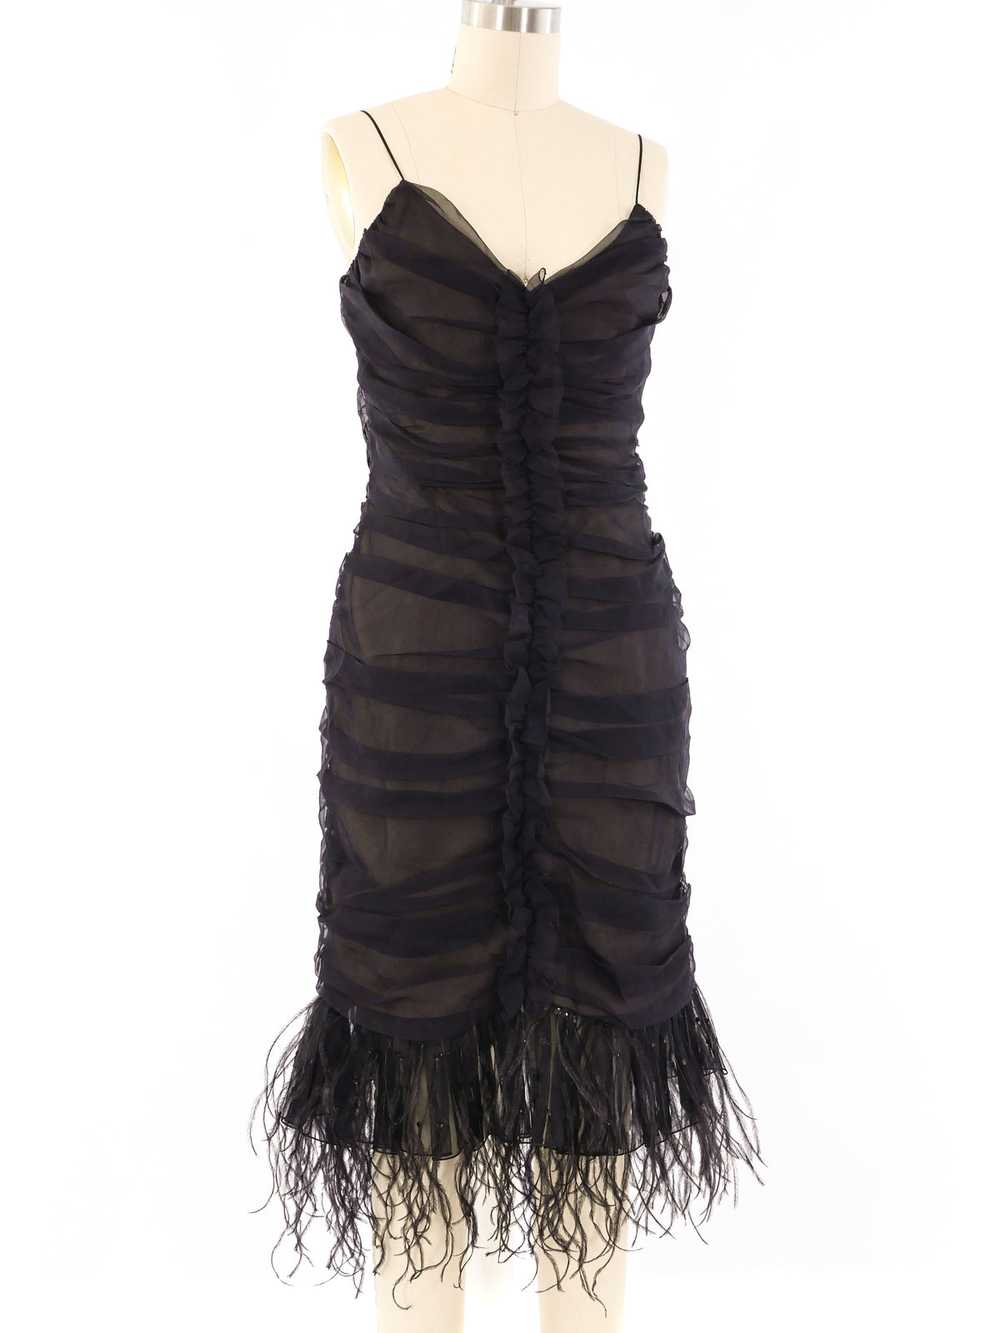 Balmain Feather Trimmed Ruched Chiffon Dress - image 2